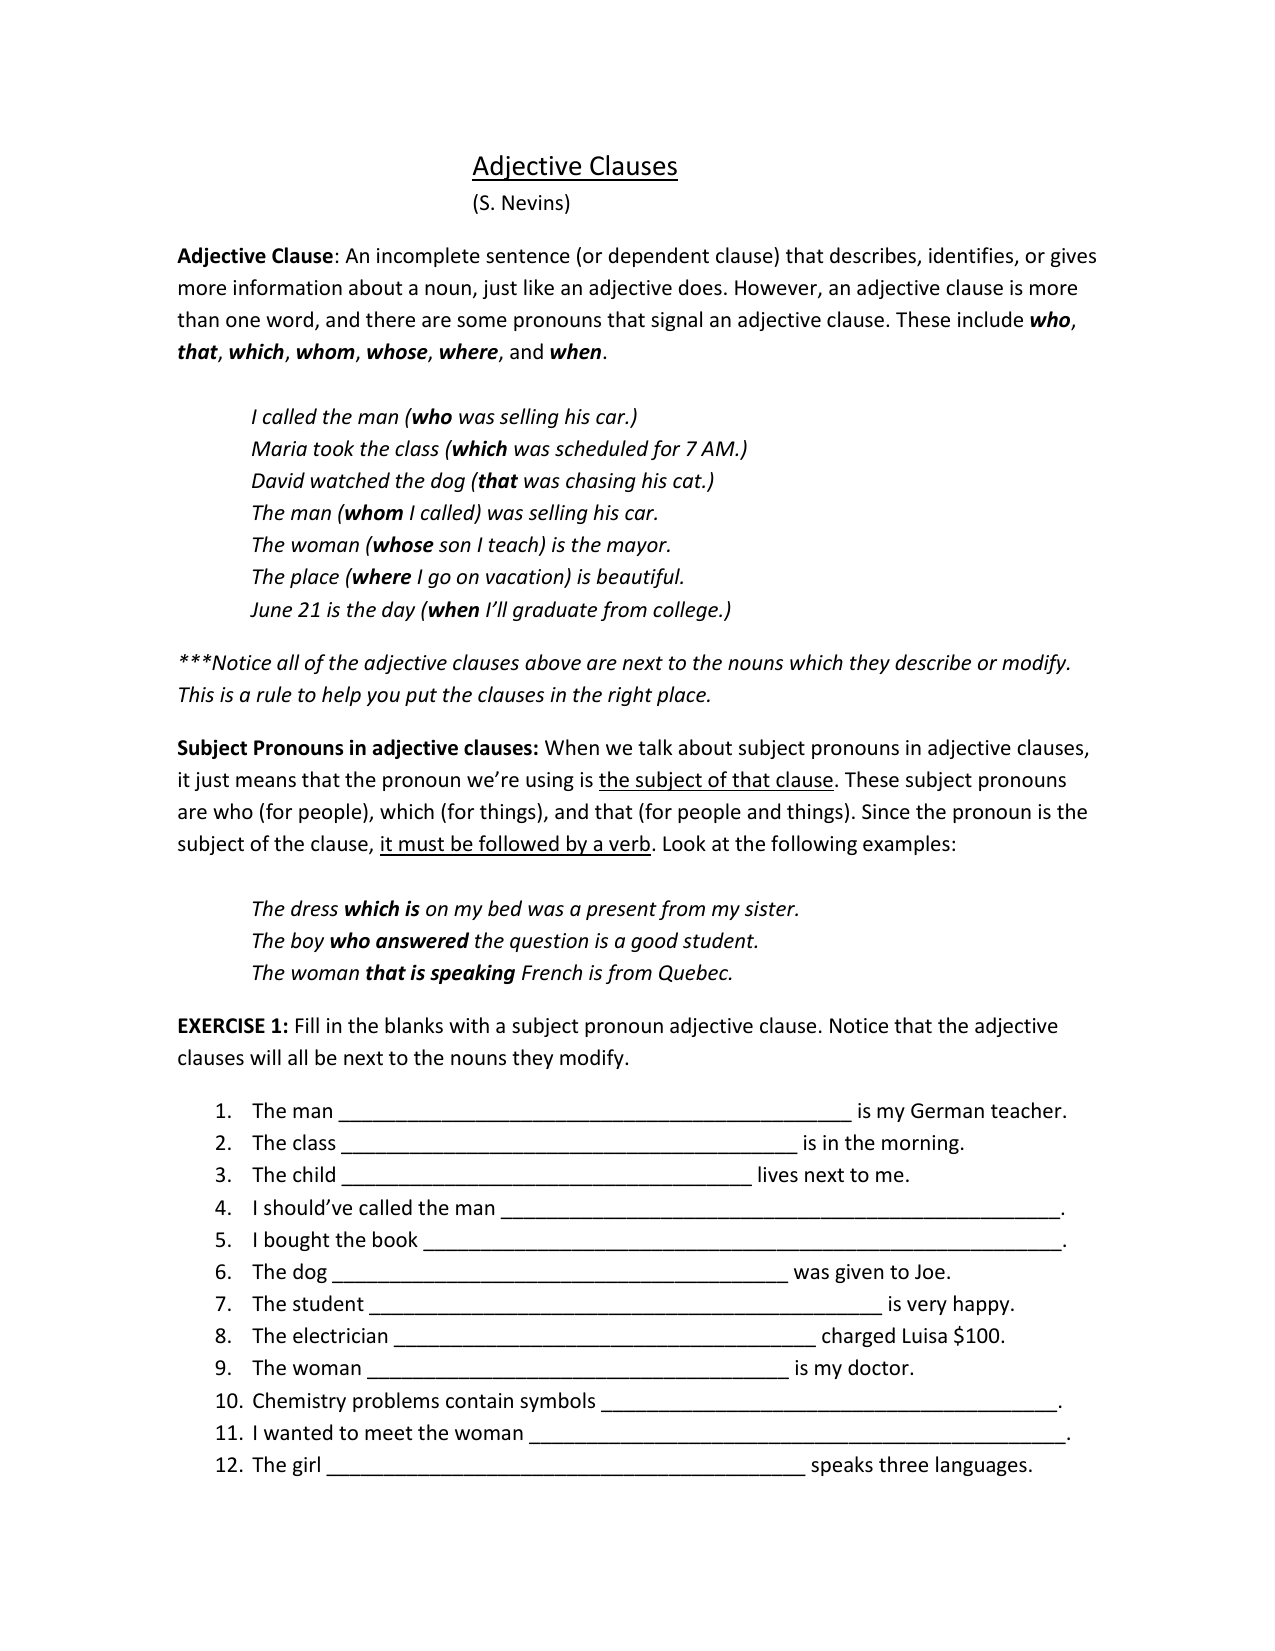 adjective-clauses-worksheet-copy